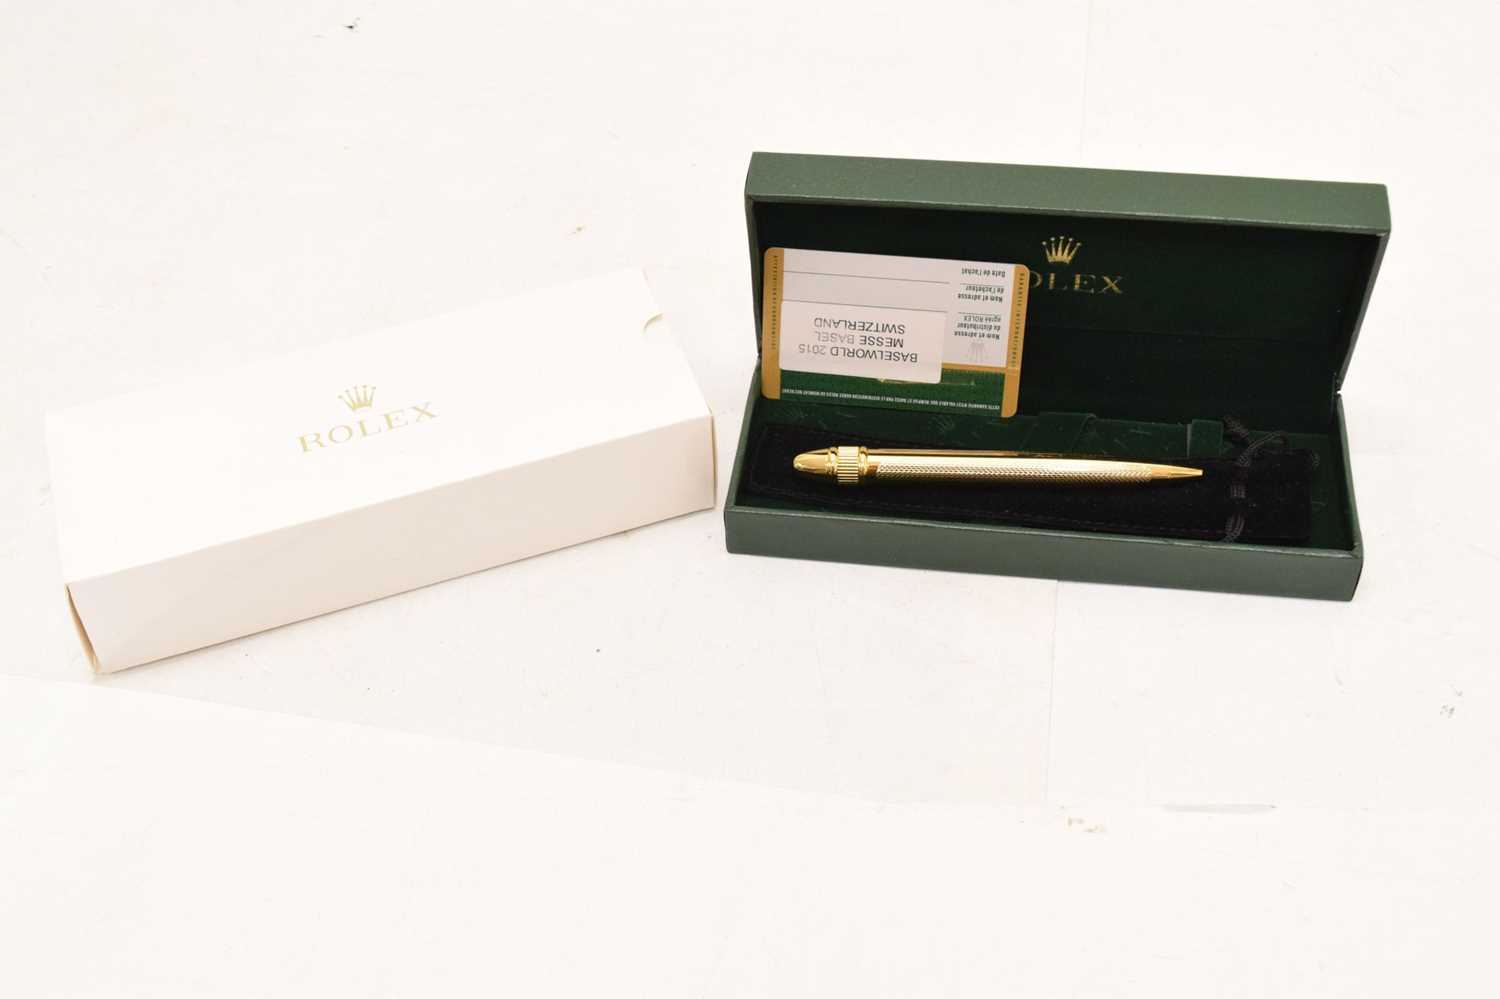 Rolex - Gilt metal retractable ballpoint pen, pair of dealers gloved and tote bag - Image 7 of 10